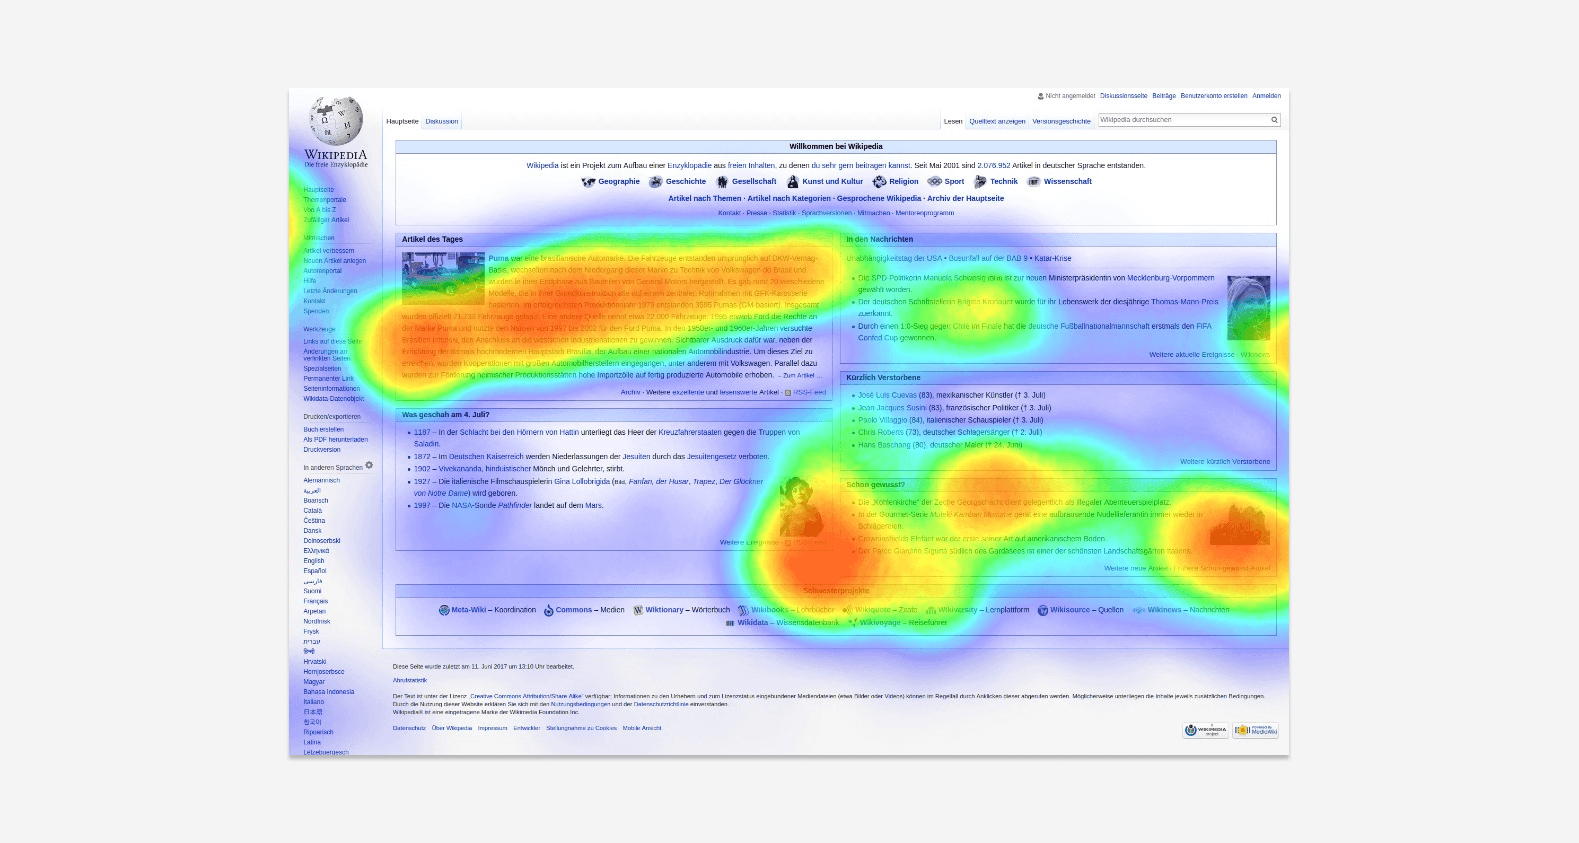 while conducting your heatmap analysis don't forget about eye tracking